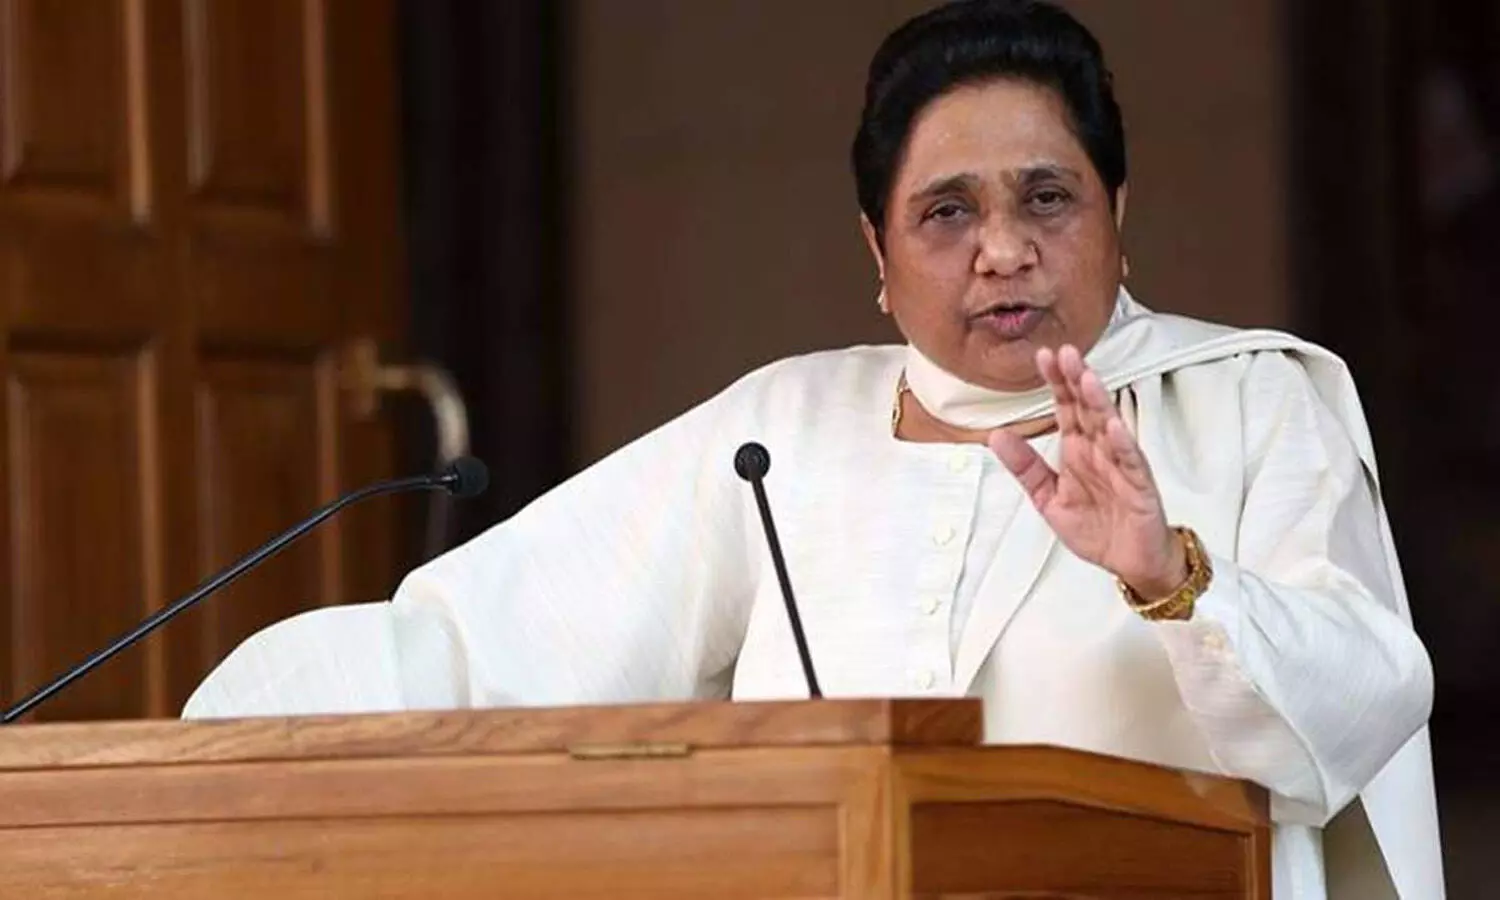 Why is Congress high command silent?: Mayawati hits out over killing of Dalit man in Rajasthan